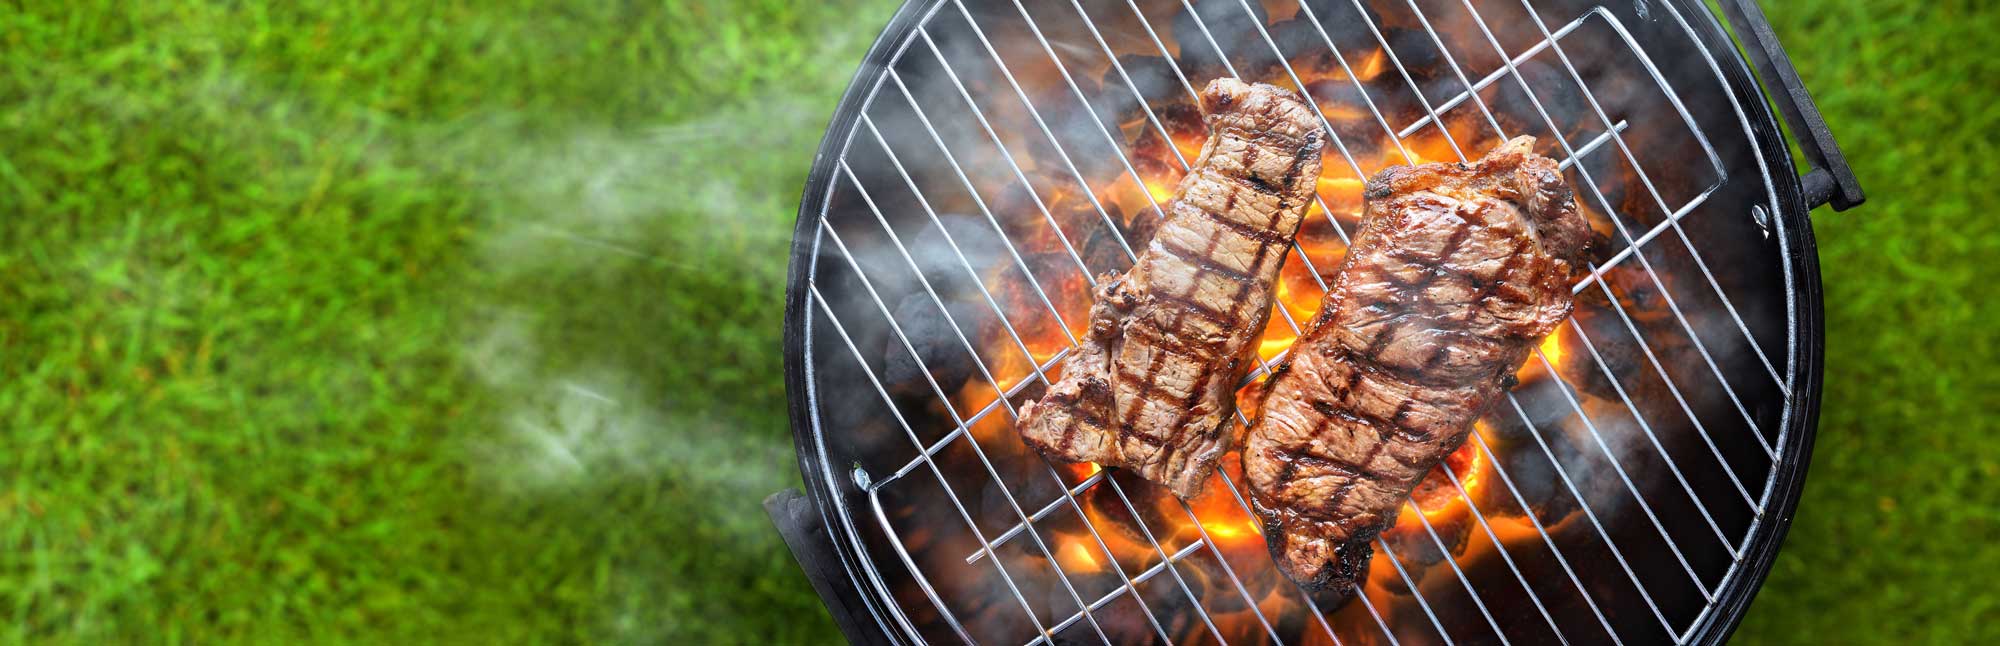 How to choose the right bbq